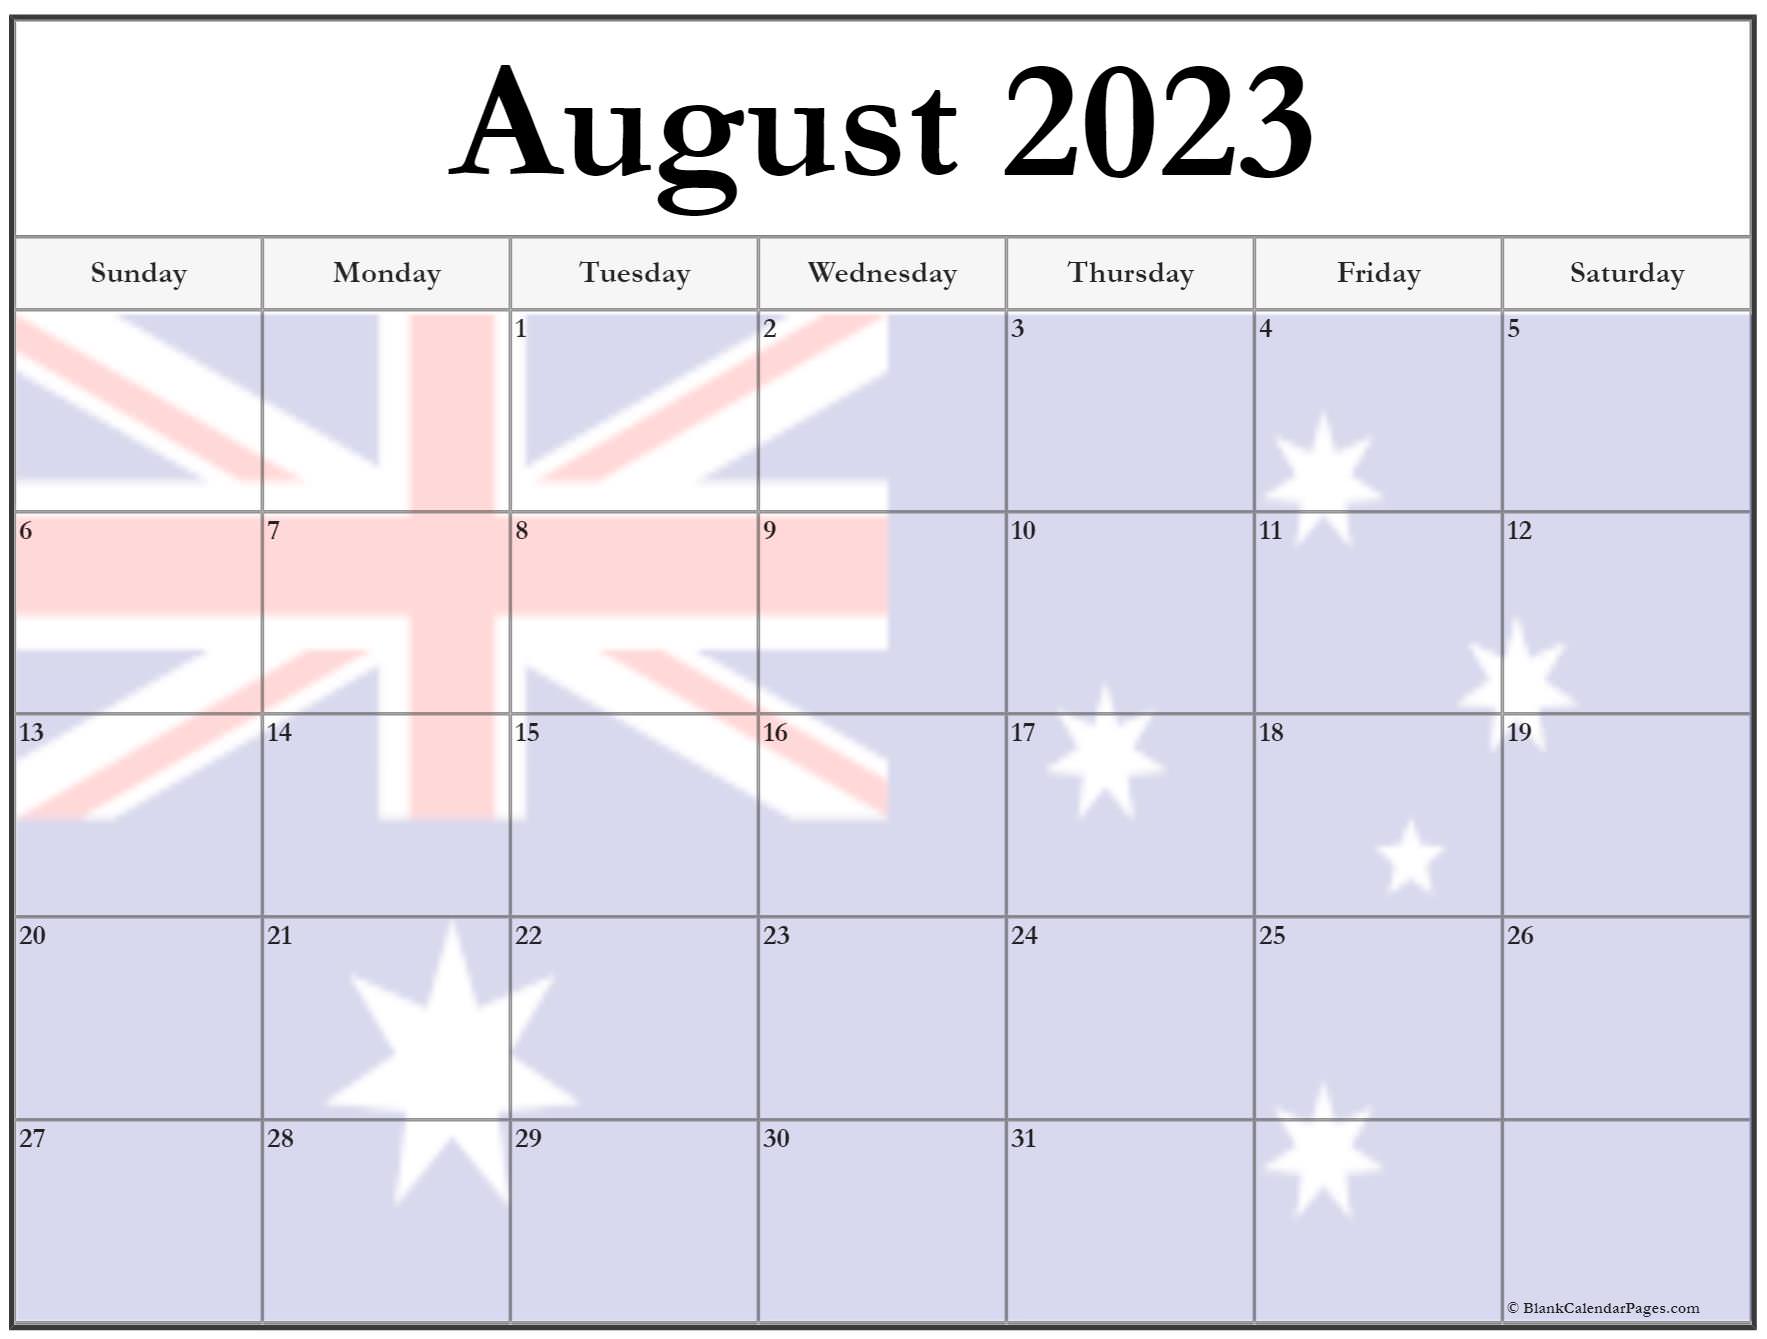 collection-of-august-2023-photo-calendars-with-image-filters